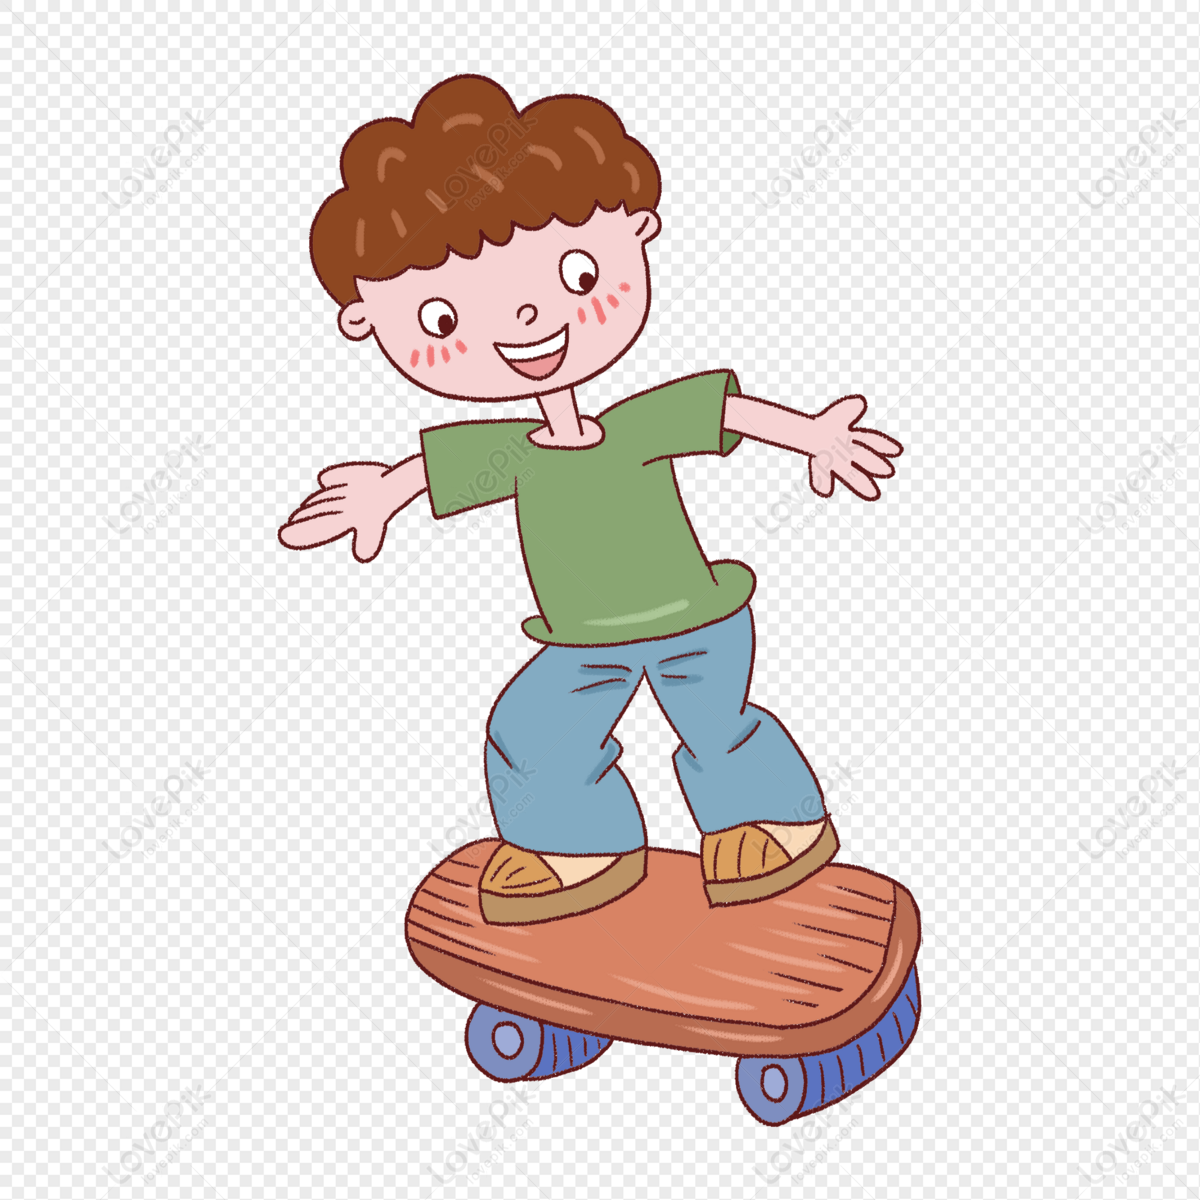 Skateboarding Boy PNG Hd Transparent Image And Clipart Image For Free ...